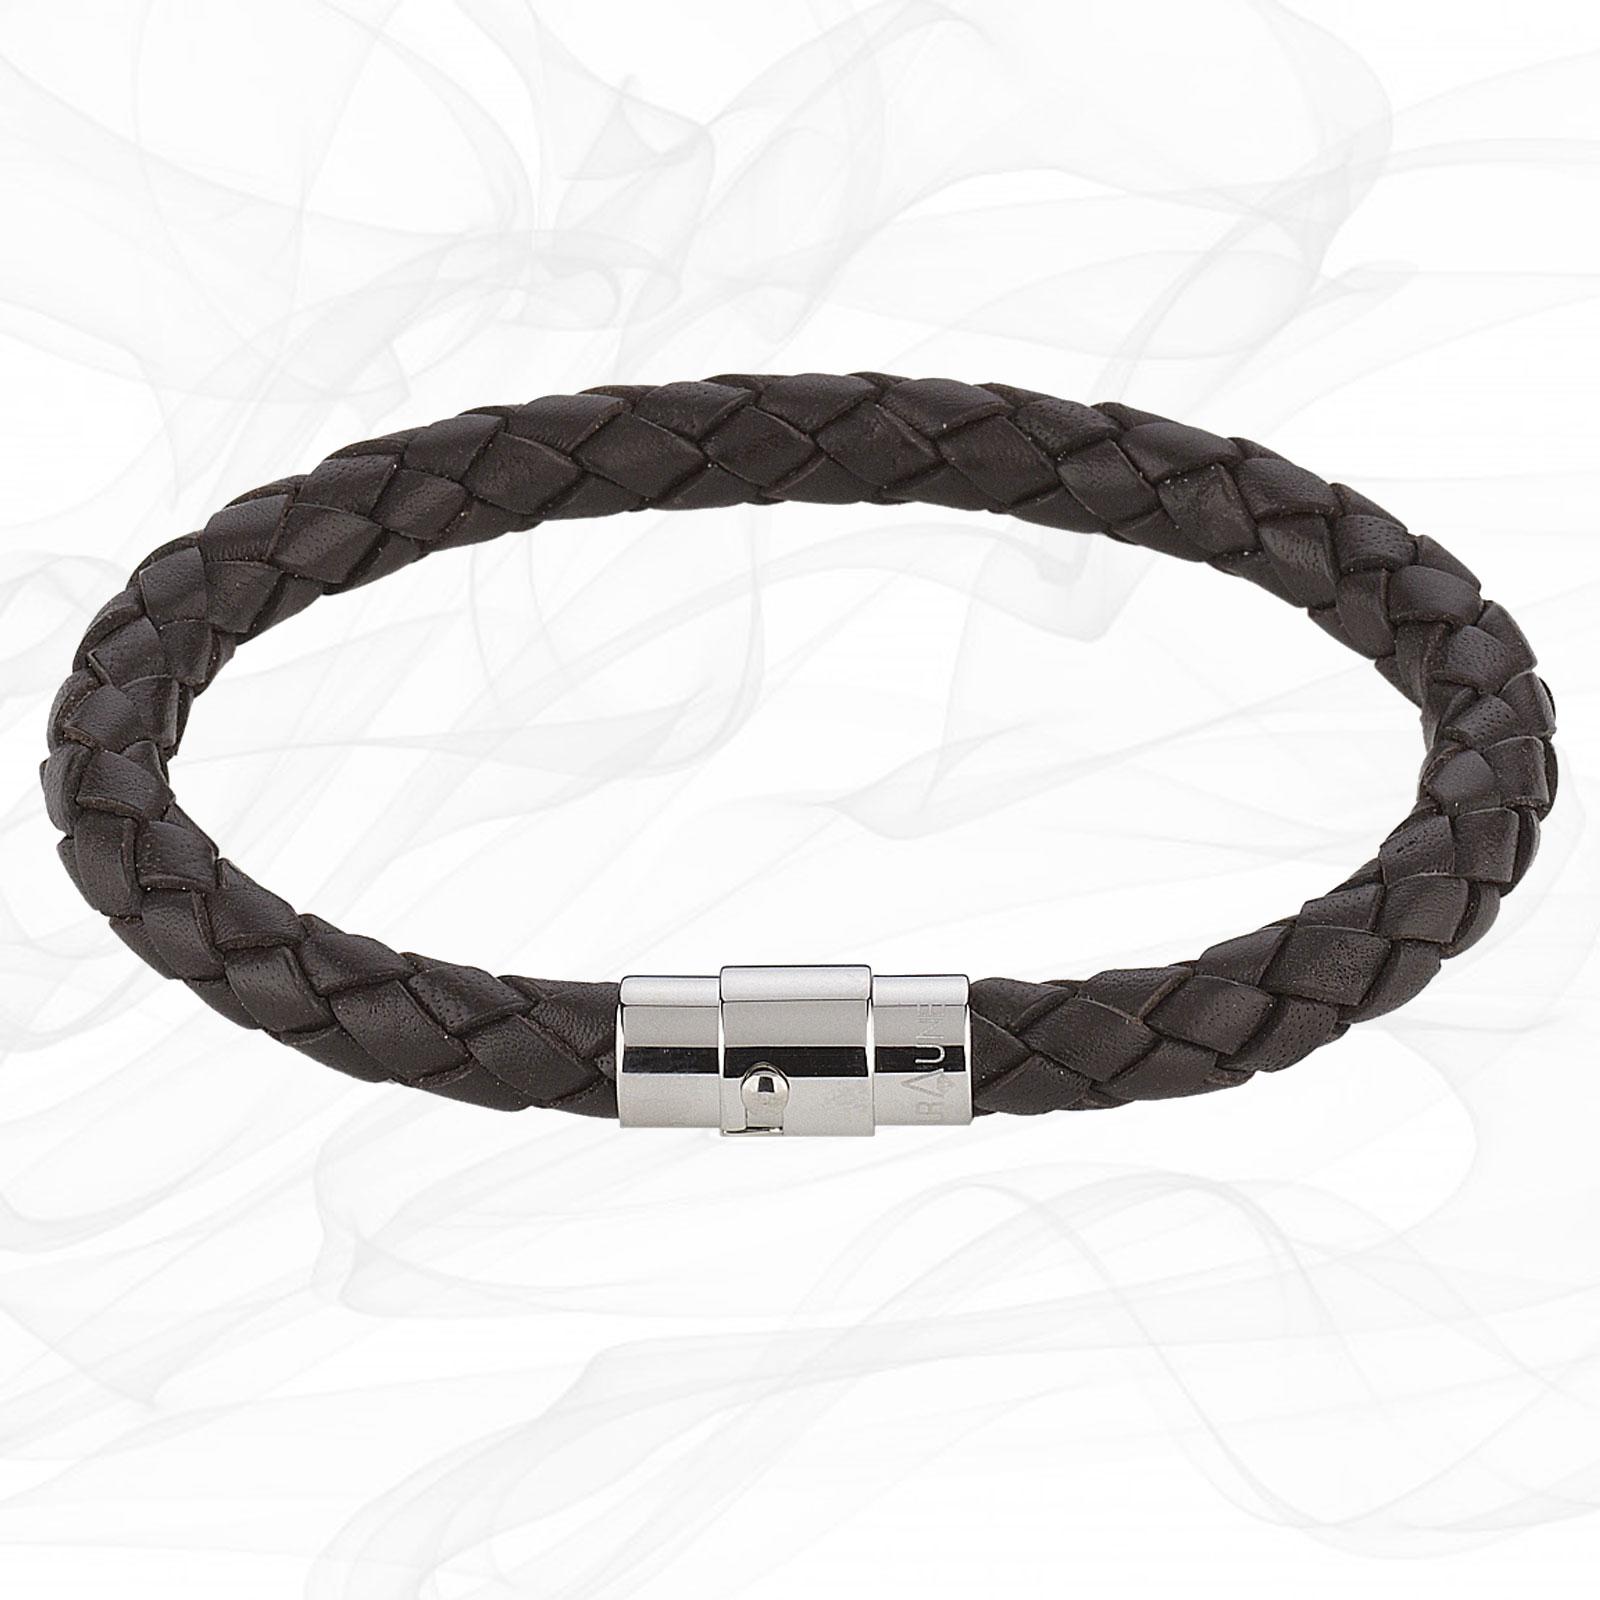 BROWN SINGLE STRAND BOLO LEATHER BRACELET & MAGNETIC CLASP for Men